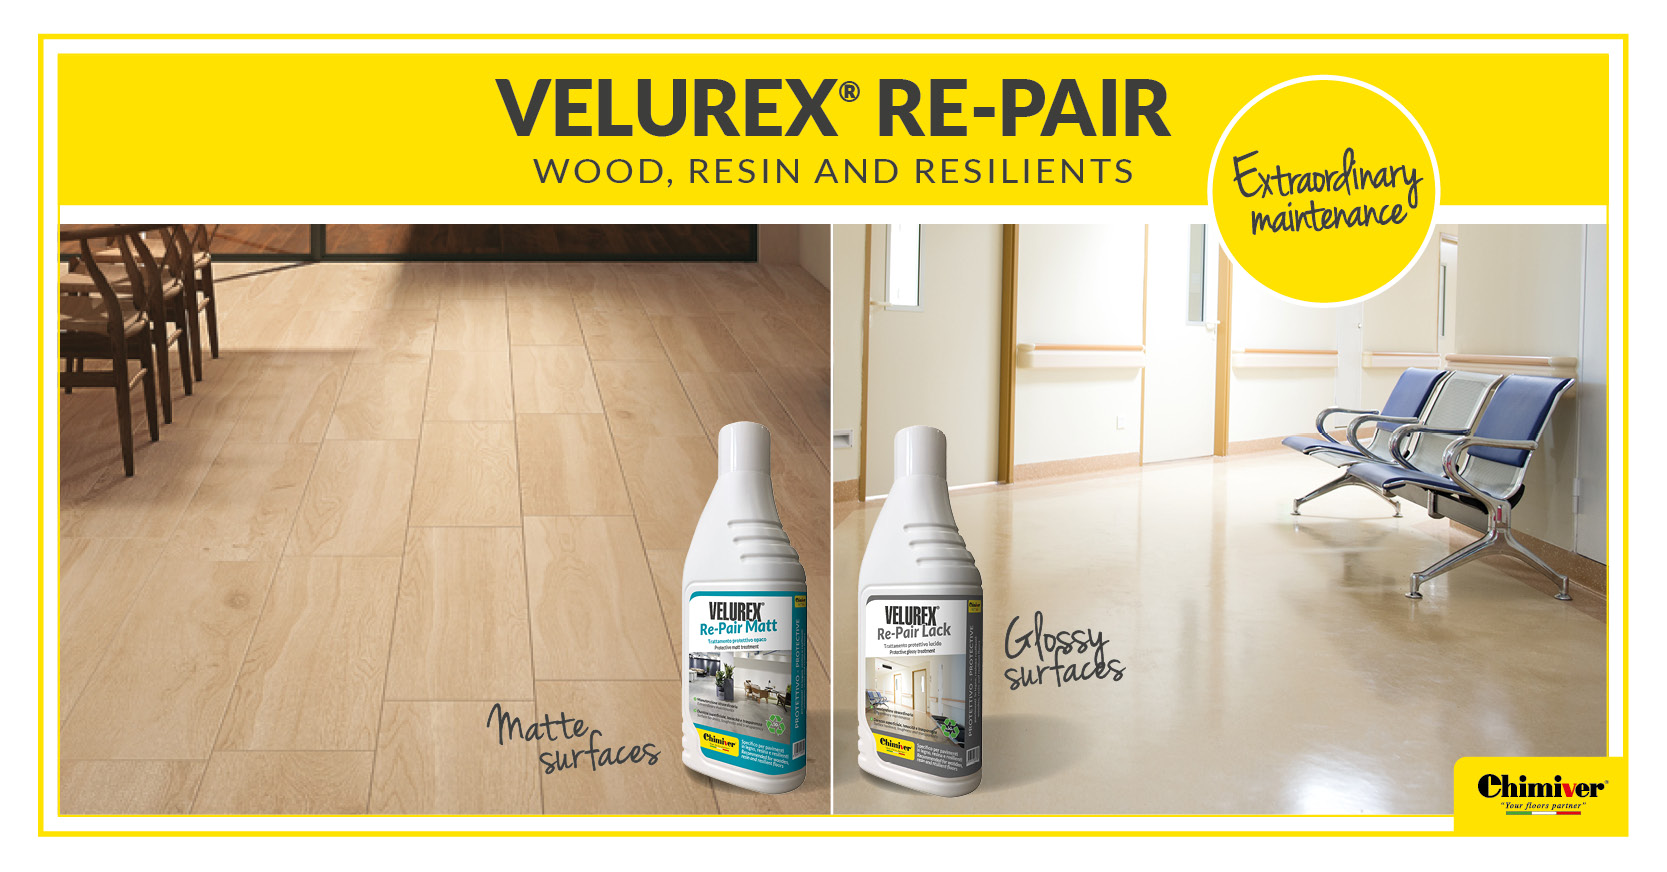 Do you know that… with VELUREX RE-PAIR you can nourish, renew, and protect your wooden, resin, and resilient floors?